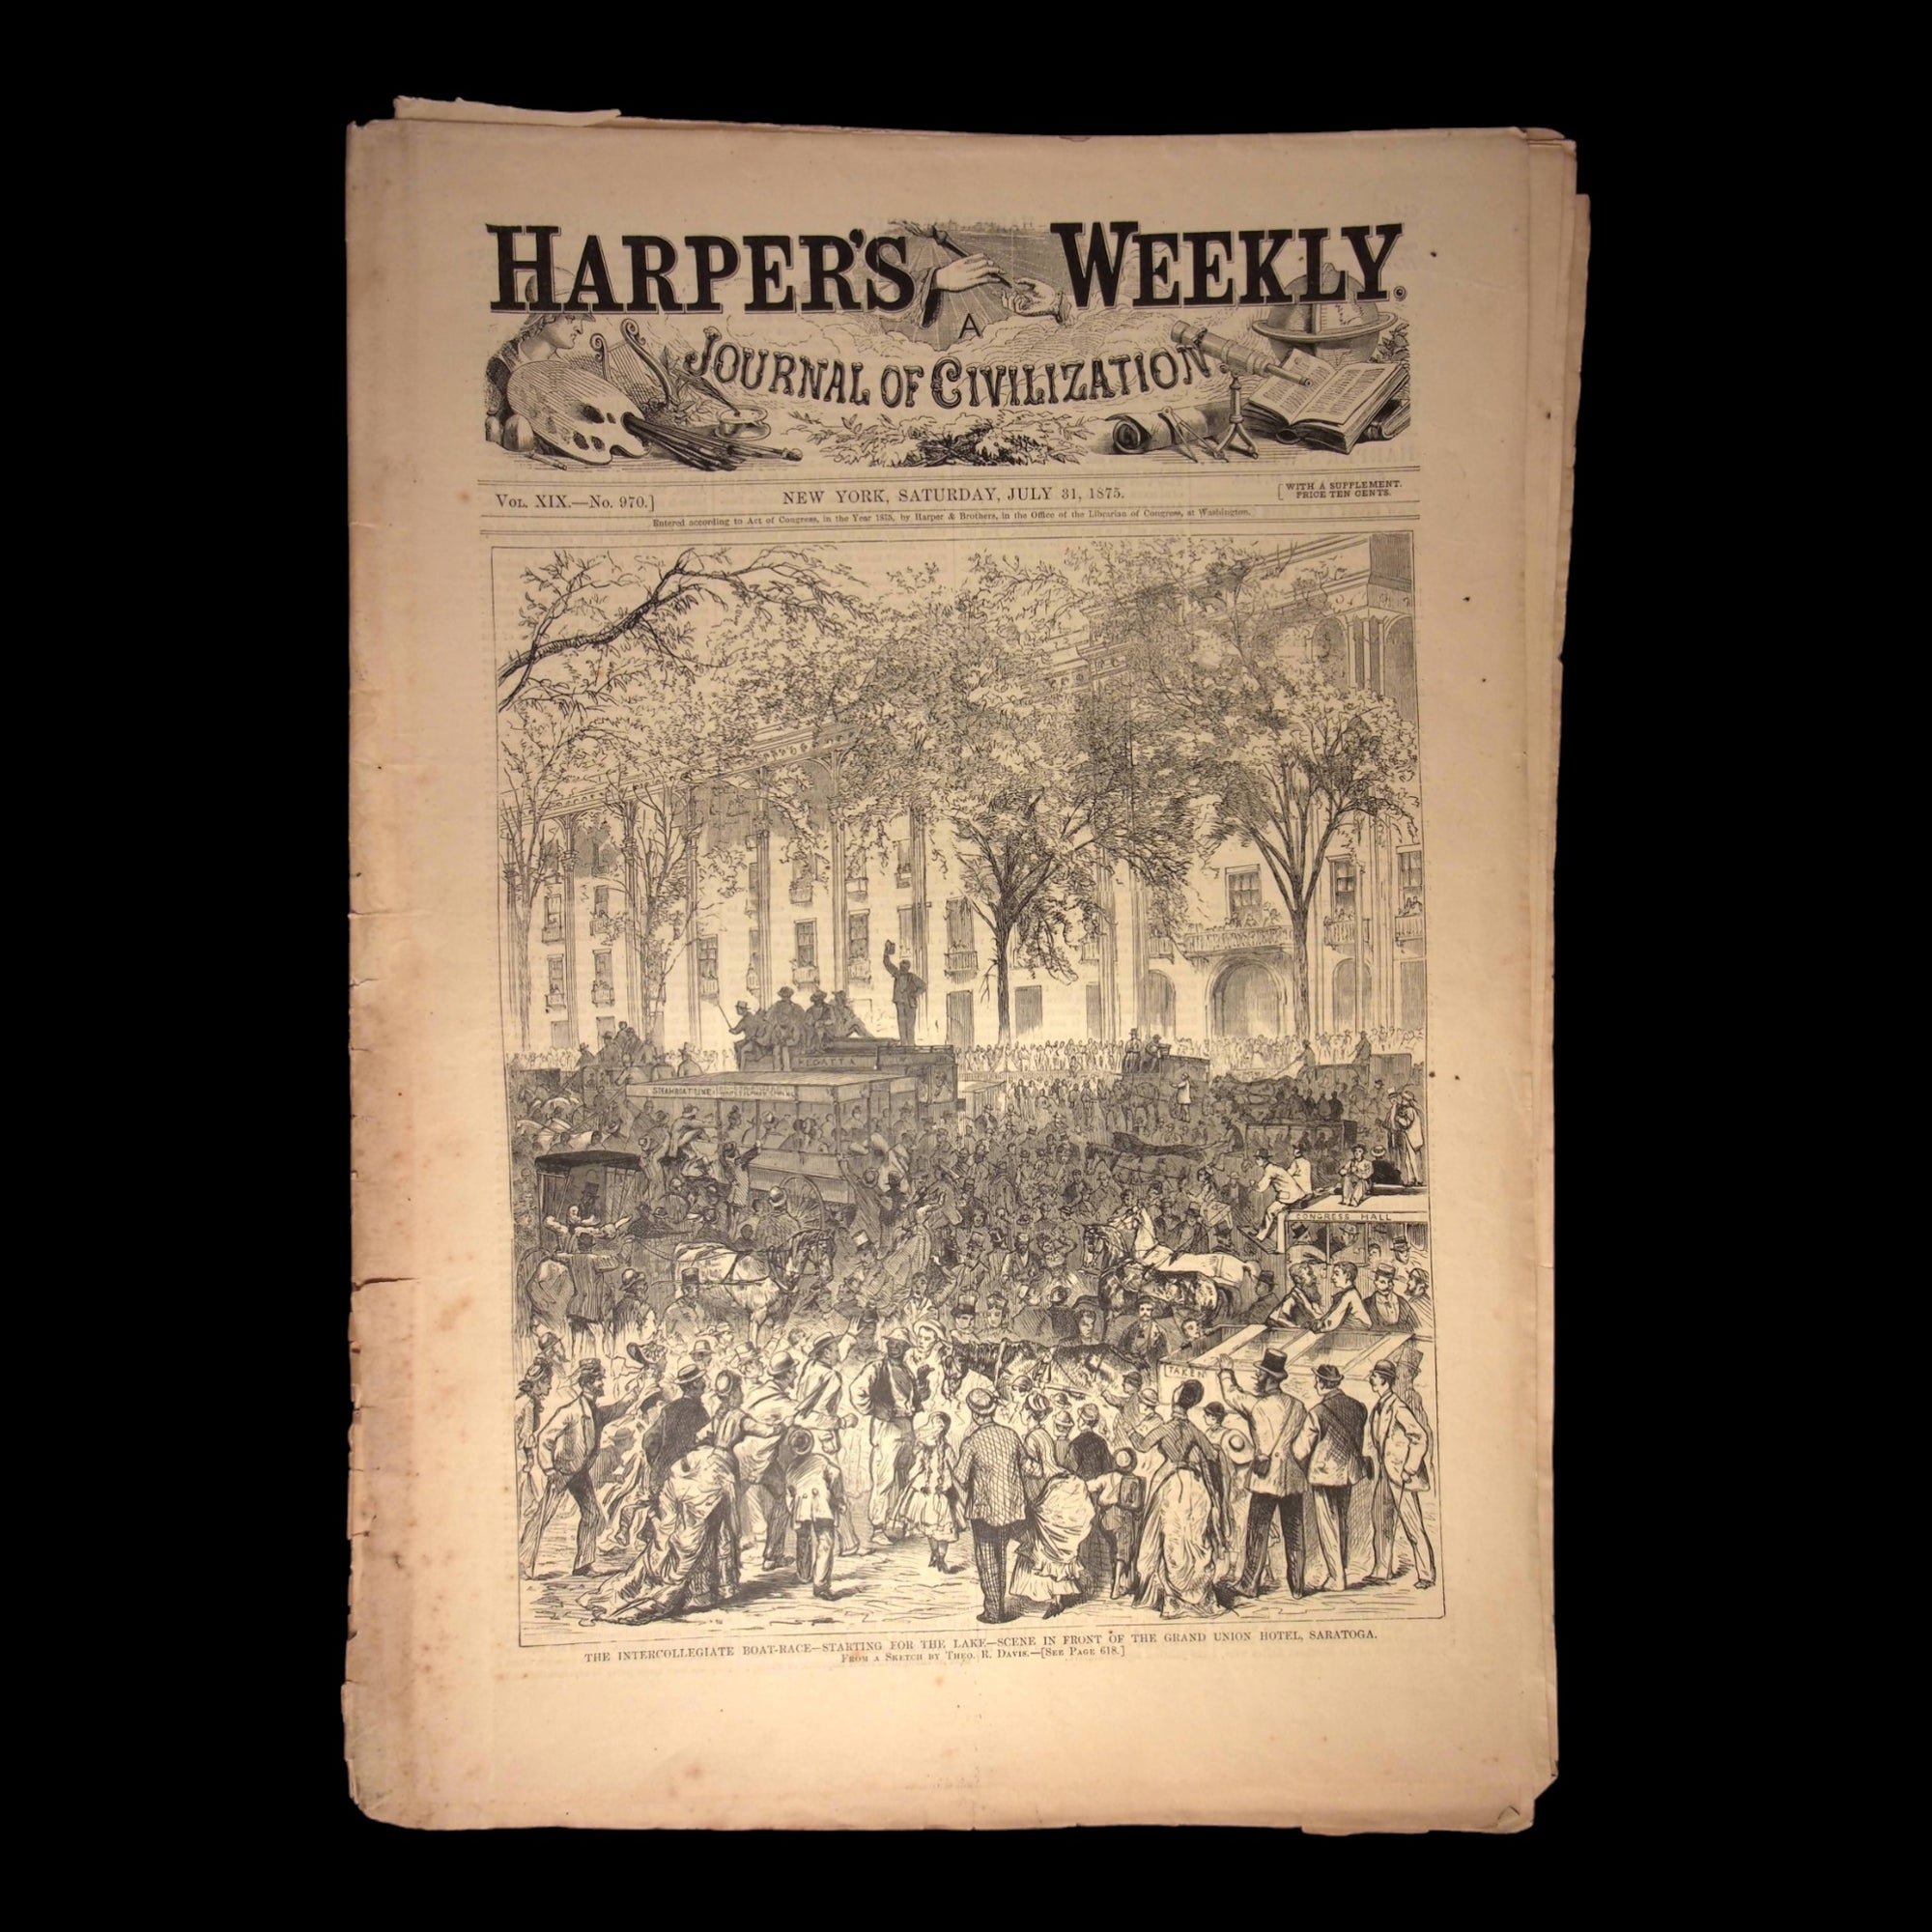 Harper's Weekly: Boat Race in Saratoga, Sketches Life in Southern States  — July 31st, 1875